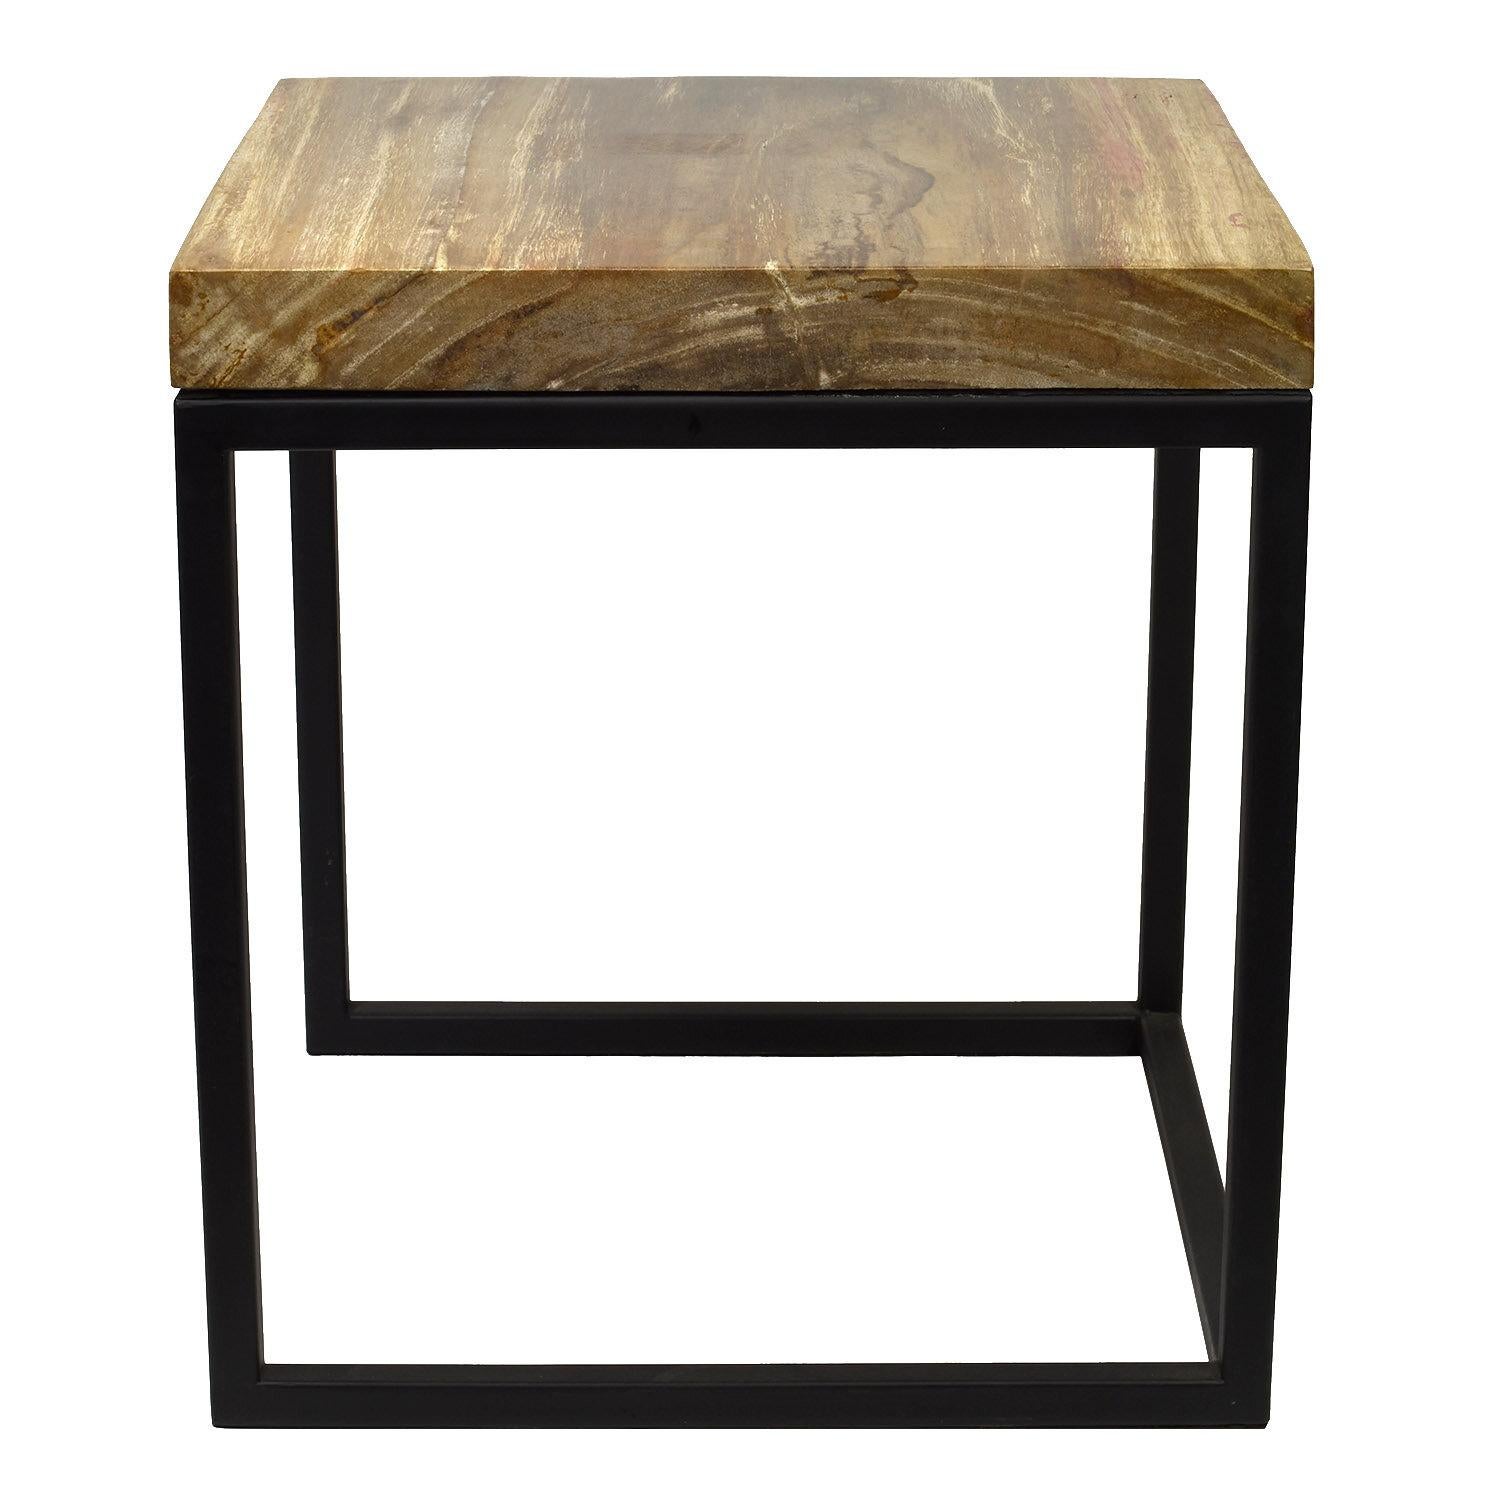 Side table with petrified wood top from Indonesia.

The petrified wood top has soft pinkish and gold tones and is from a millions of years old Indonesian fossilized rainforest. The table frame is black painted metal.

Petrified wood is a fossilized